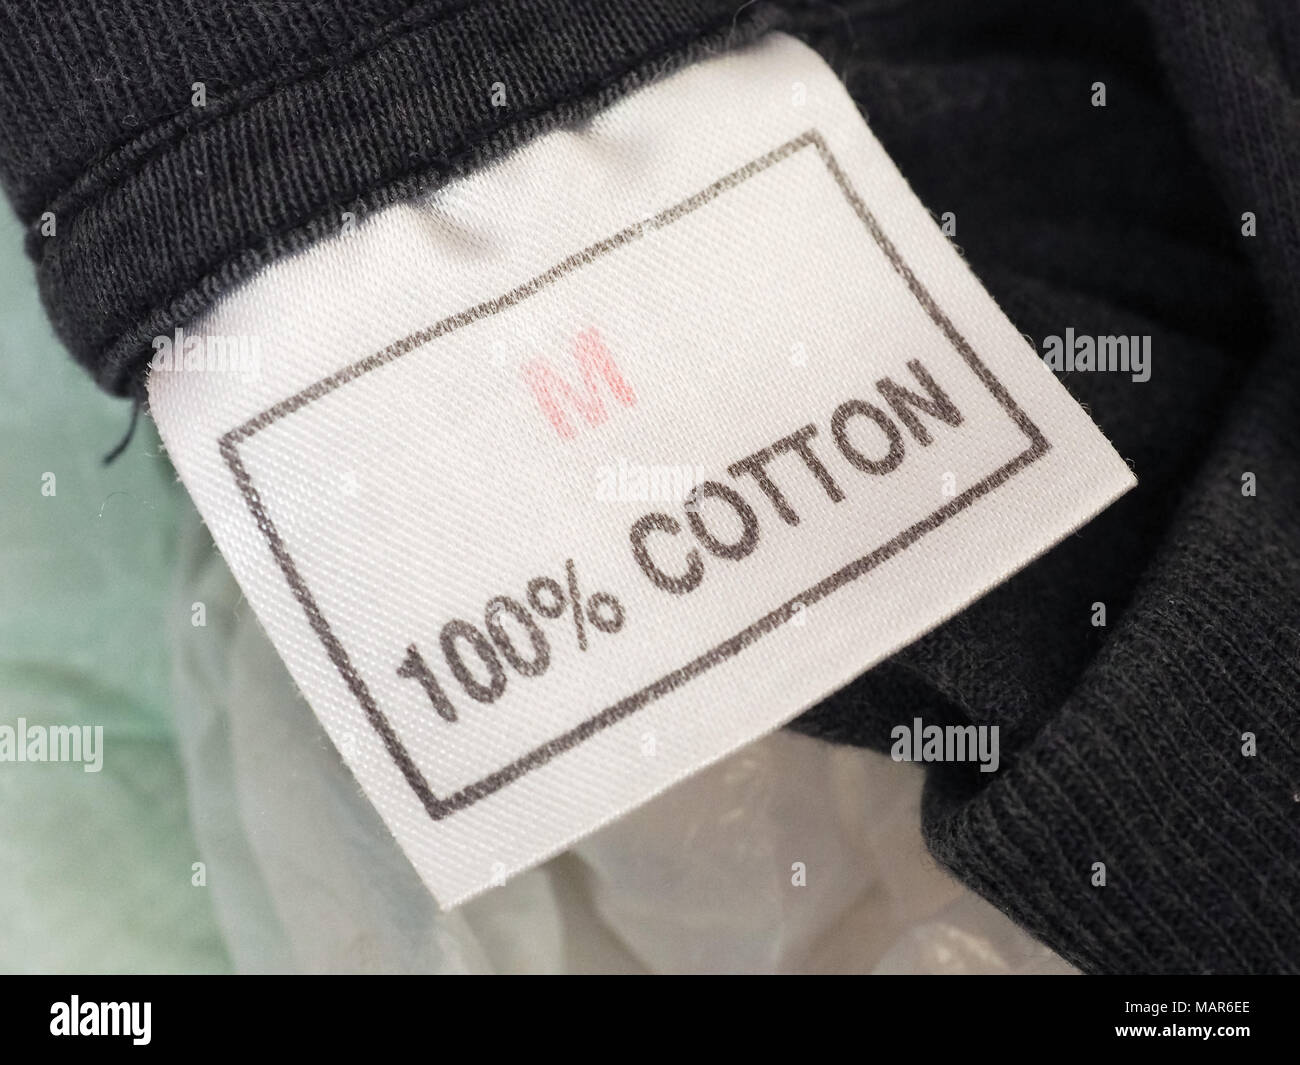 One hundred percent cotton label tag on clothing Stock Photo - Alamy